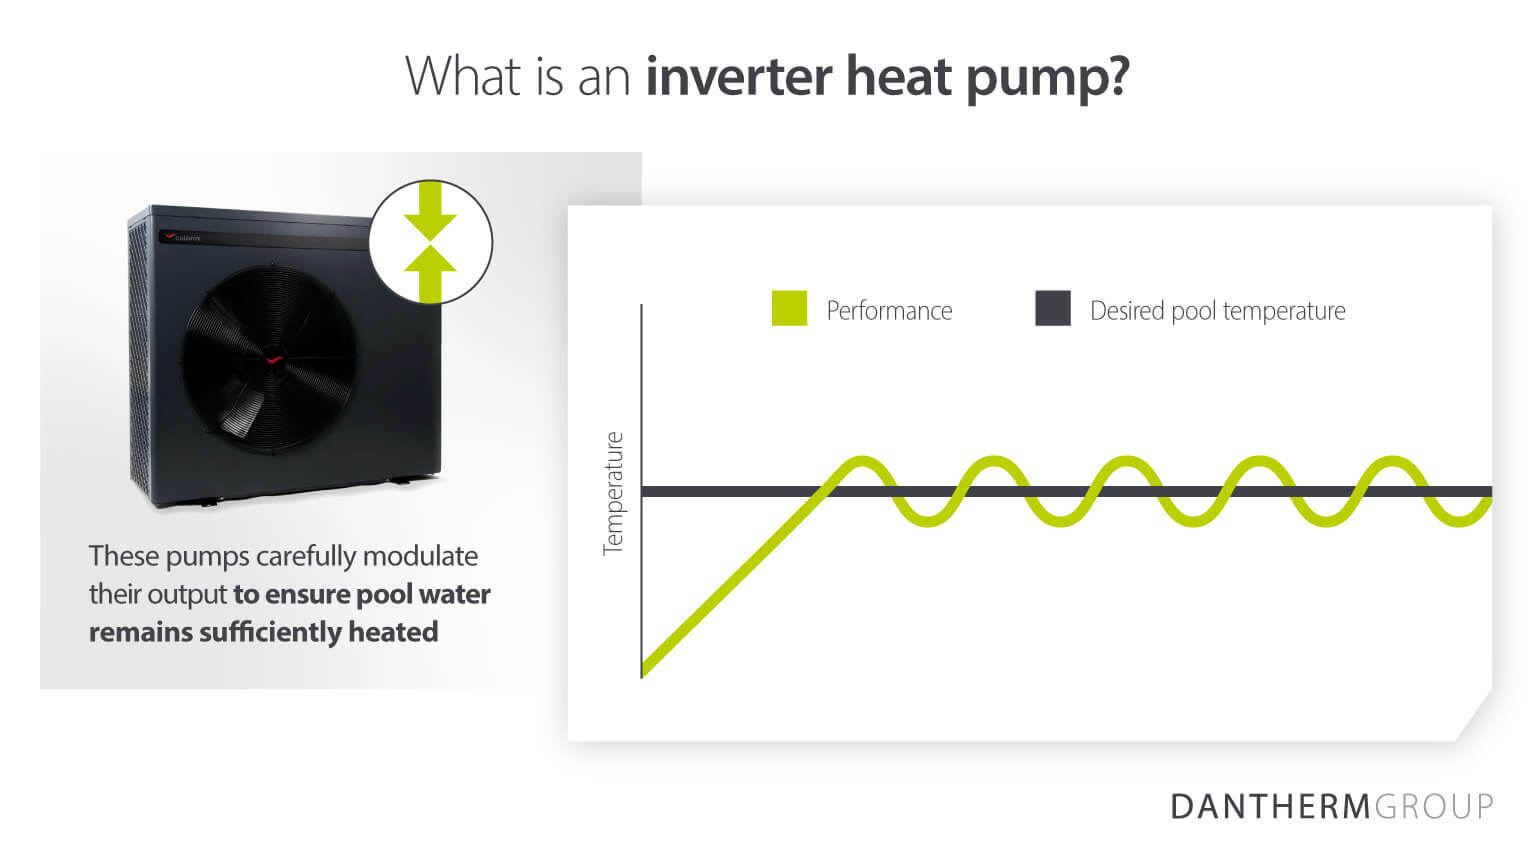 Showing how inverter swimming pool heat pumps work - Infographic image